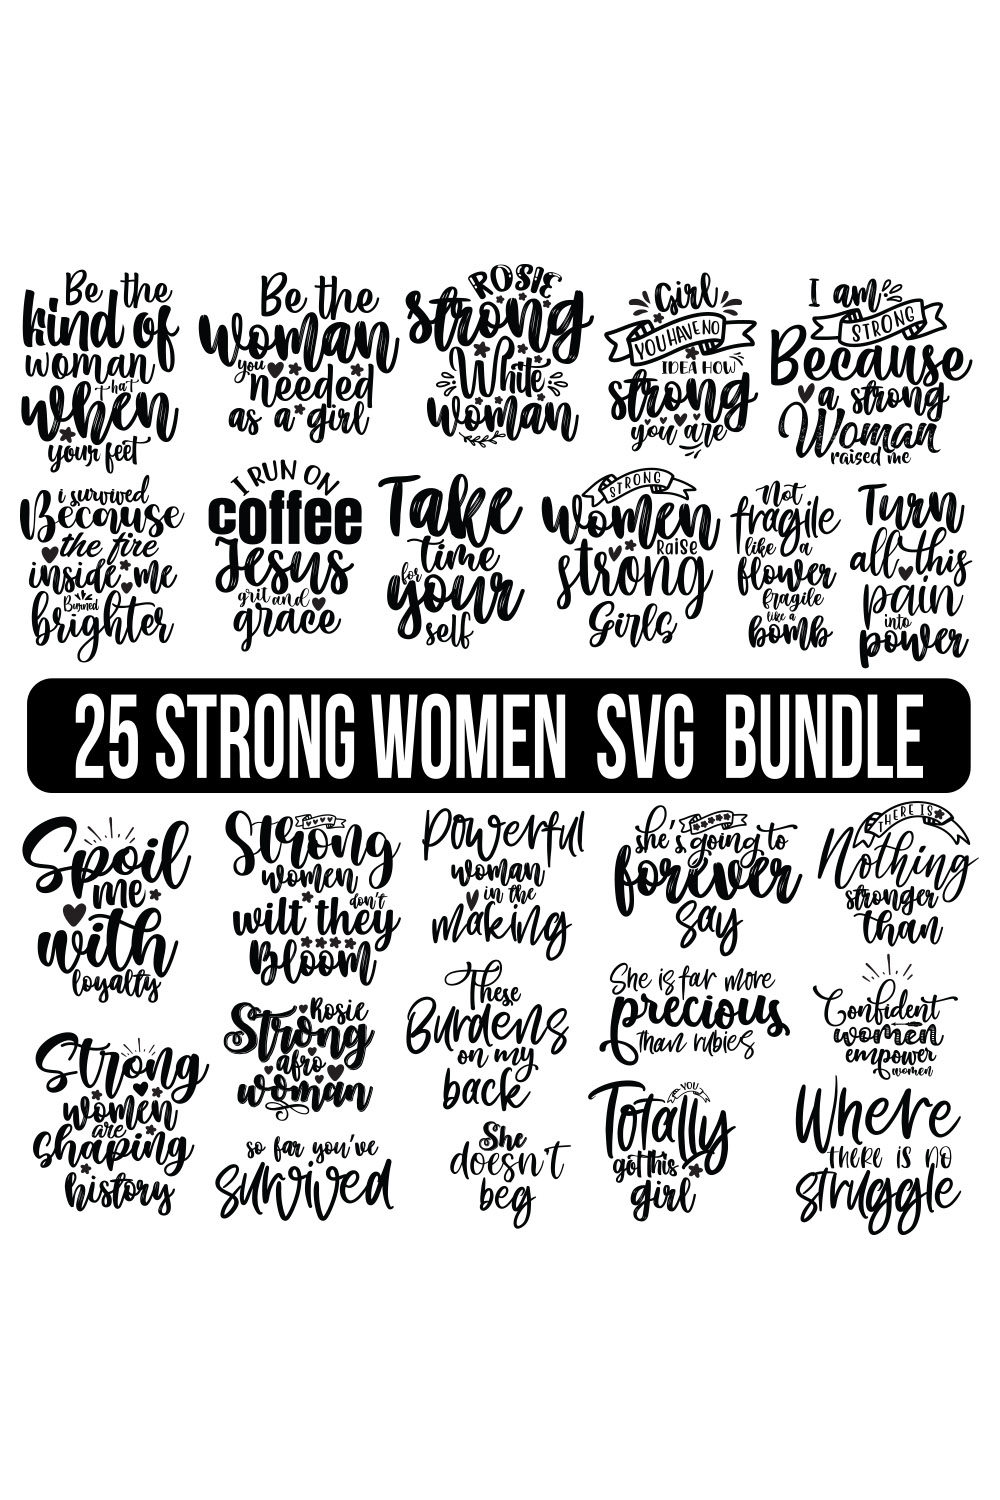 Strong Women SVG Bundle, Strong Woman Bundle, Woman Empowerment Png, Retro Wildflowers Png, Empowered women svg bundle, pinterest preview image.